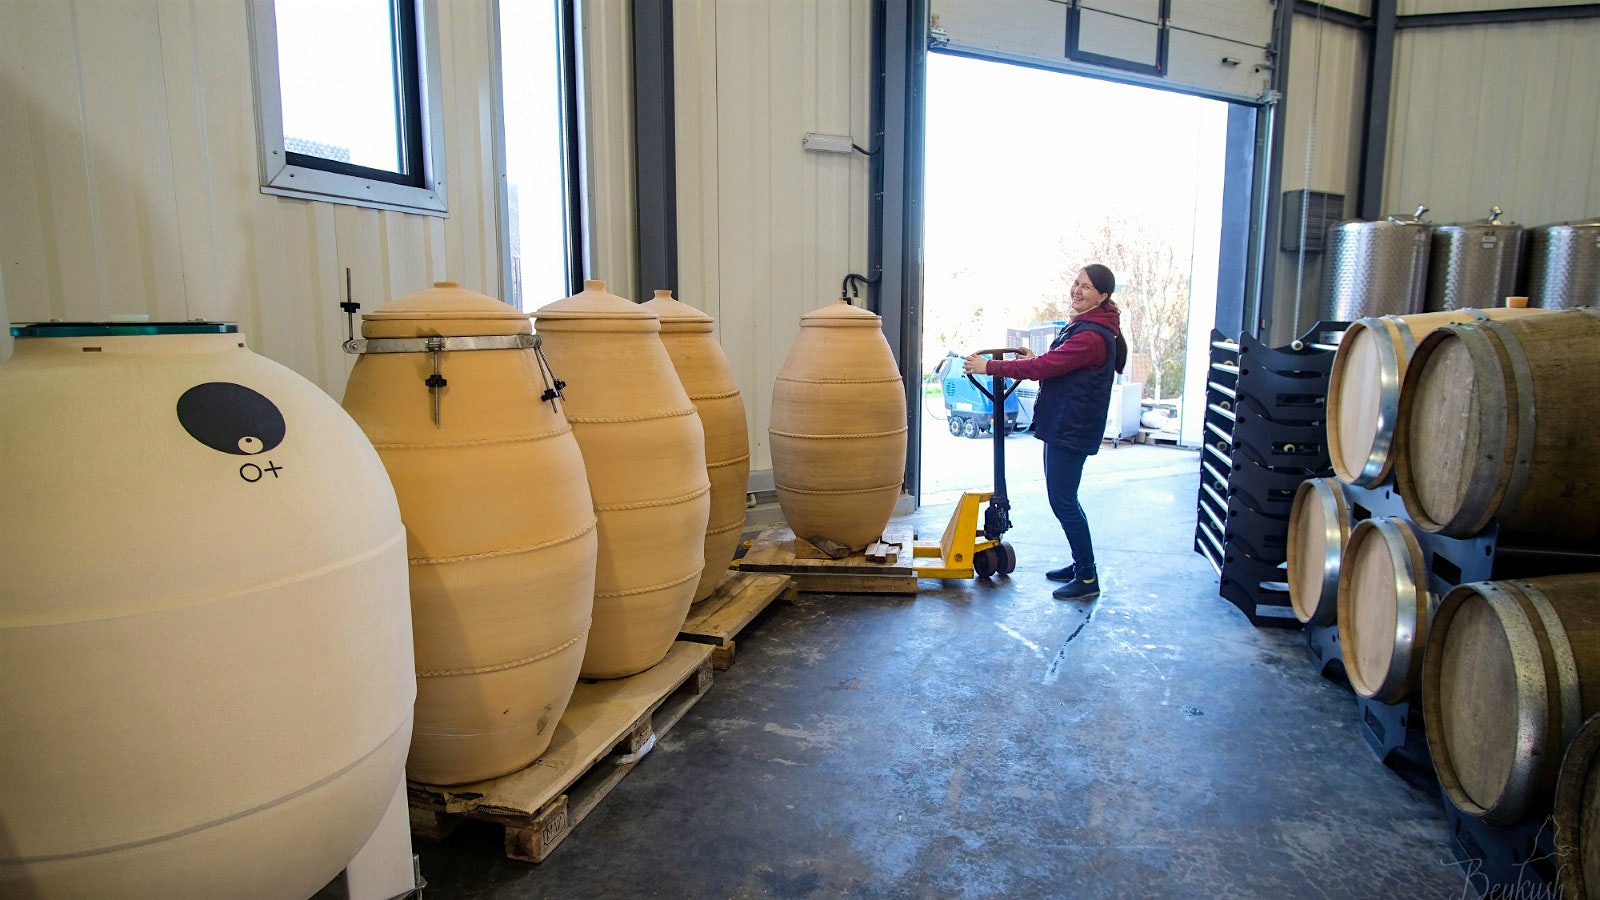  A winemaker at Beykush works with amphora.